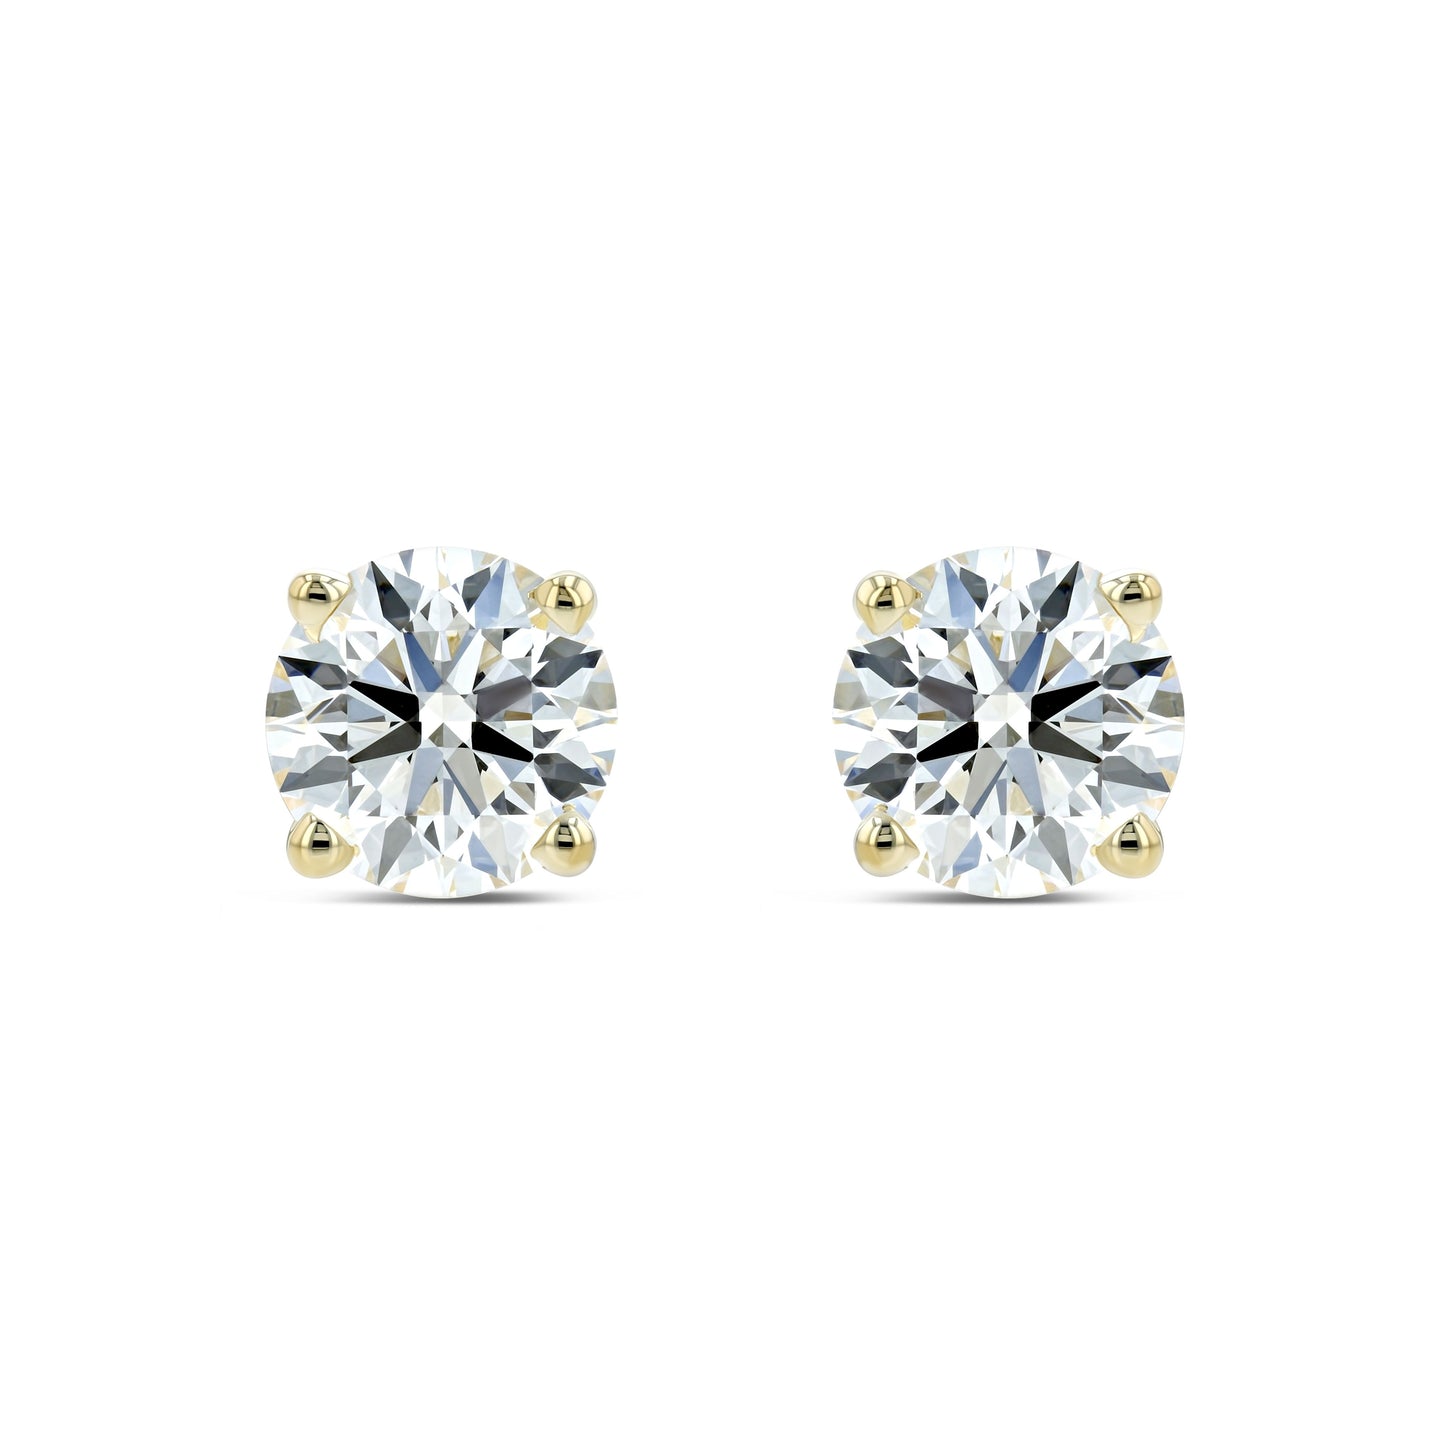 18k Yellow Gold 4-prong Round Diamond Stud Earrings 1/2ctw (4.0mm Ea), G-h Color, I1 Clarity